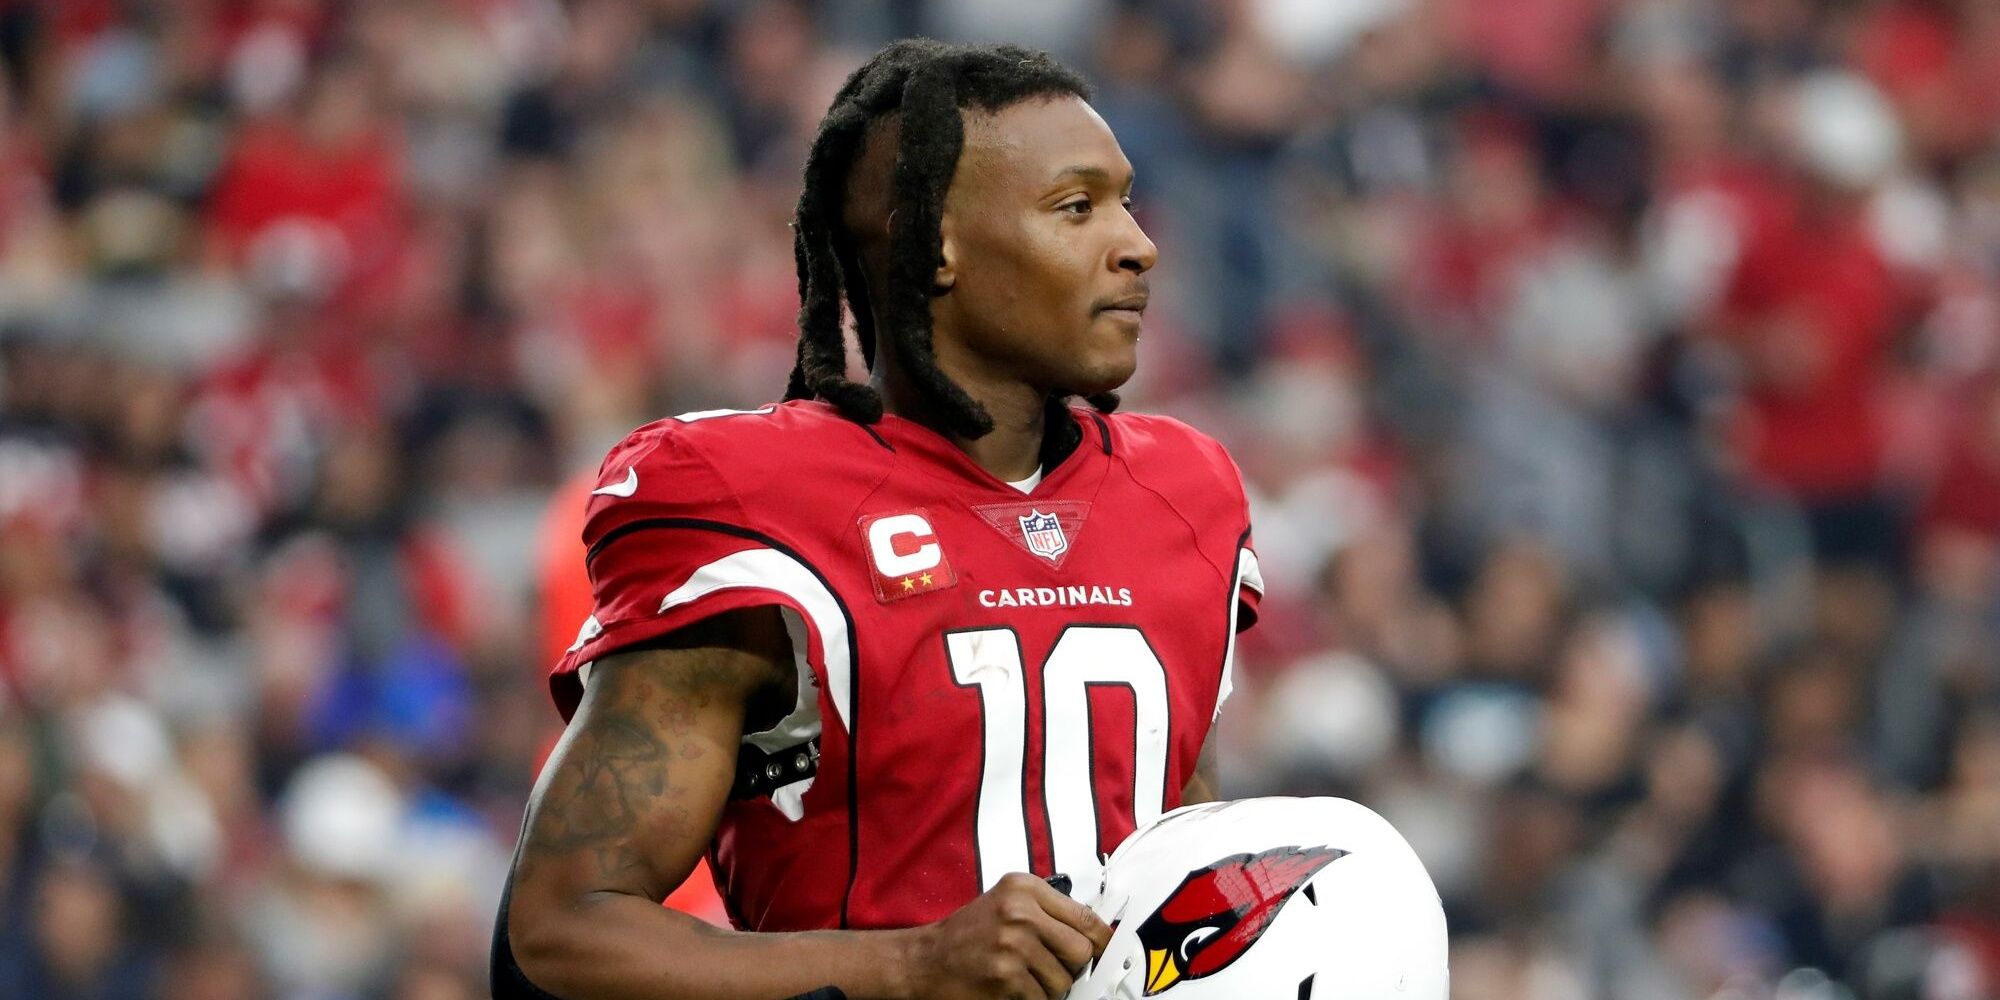 DeAndre Hopkins standing with his helmet off in a red Cardinals jersey